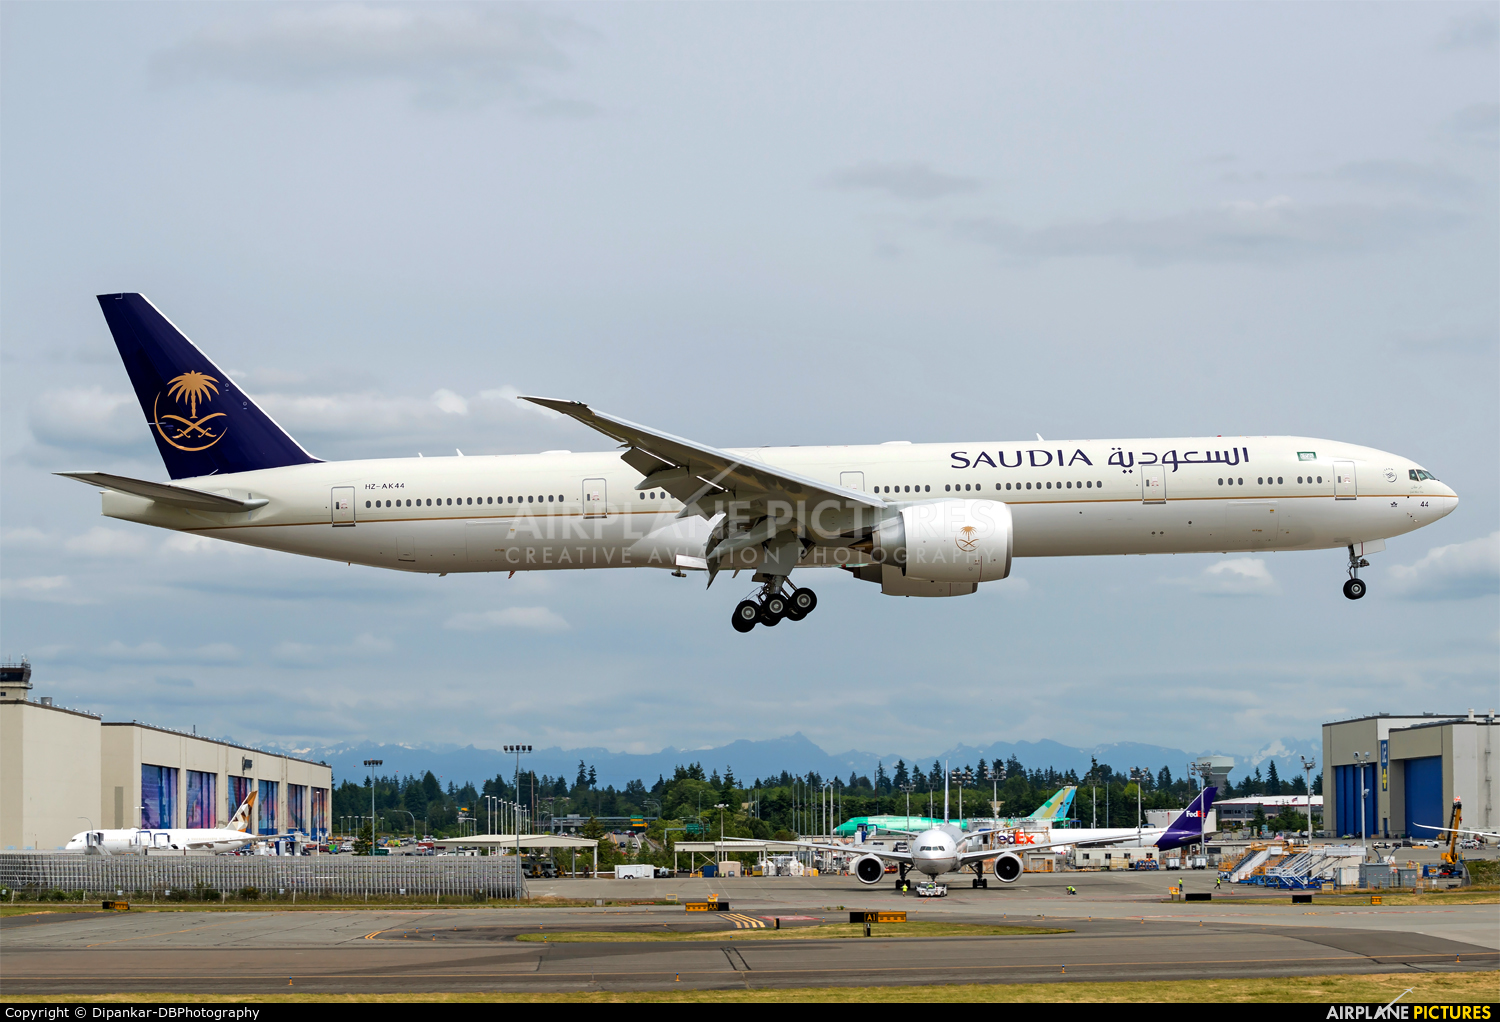 Saudi Arabian Airlines HZ-AK44 aircraft at Everett - Snohomish County / Paine Field